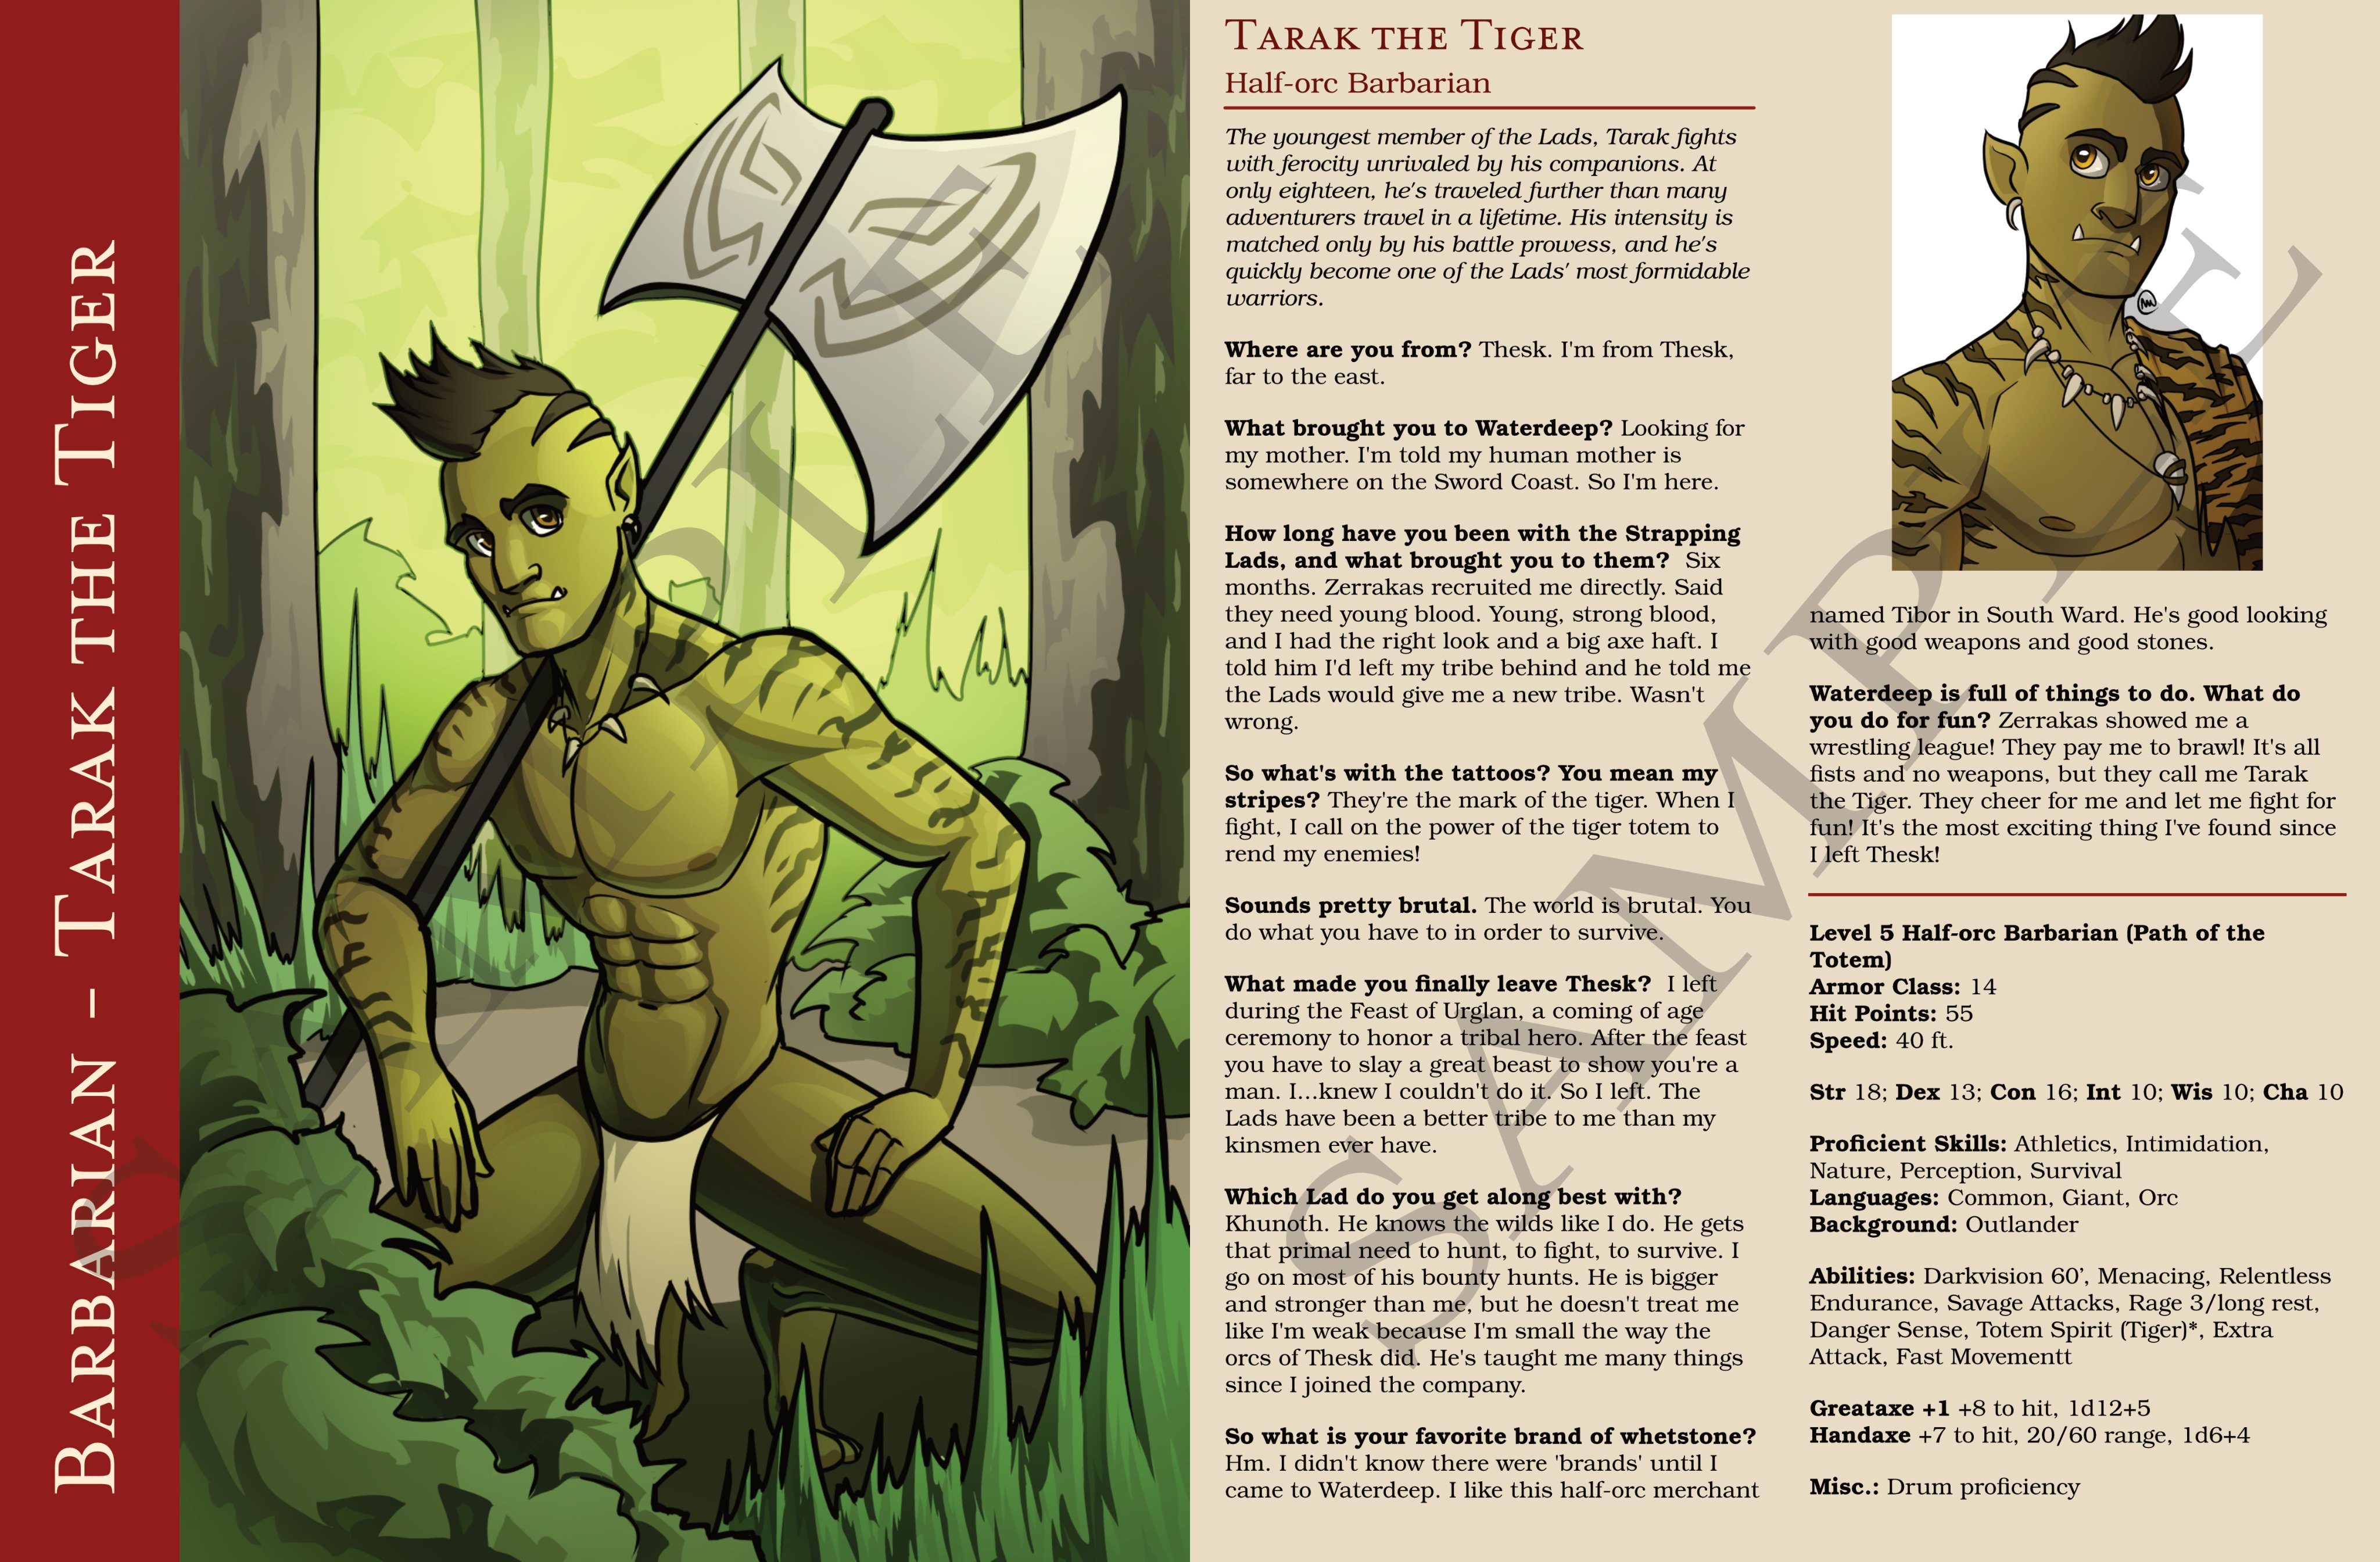 Micah @ Commissions Open! on Twitter: "The Strapping Lads #DnD supplement! Featuring 12 #DnD5e fellows, one for each PHB class. Has art, character interviews, and stats for each one! Gumroad (